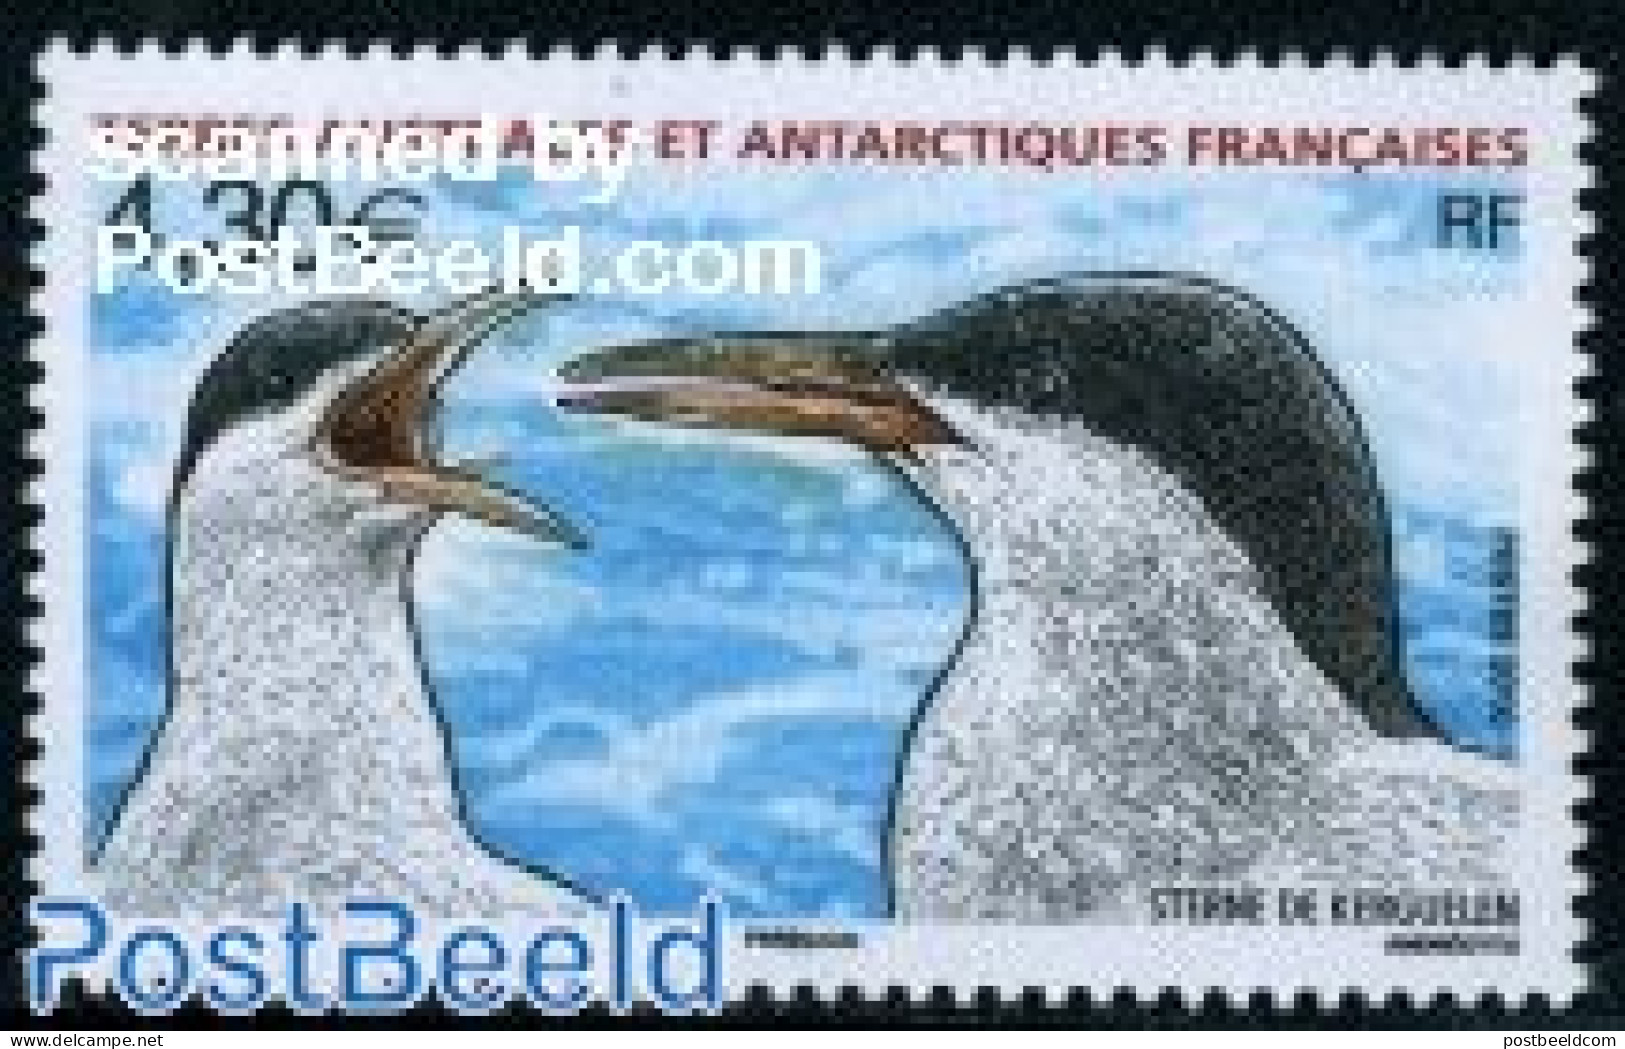 French Antarctic Territory 2010 Kerguelen Tern 1v, Mint NH, Nature - Birds - Unused Stamps